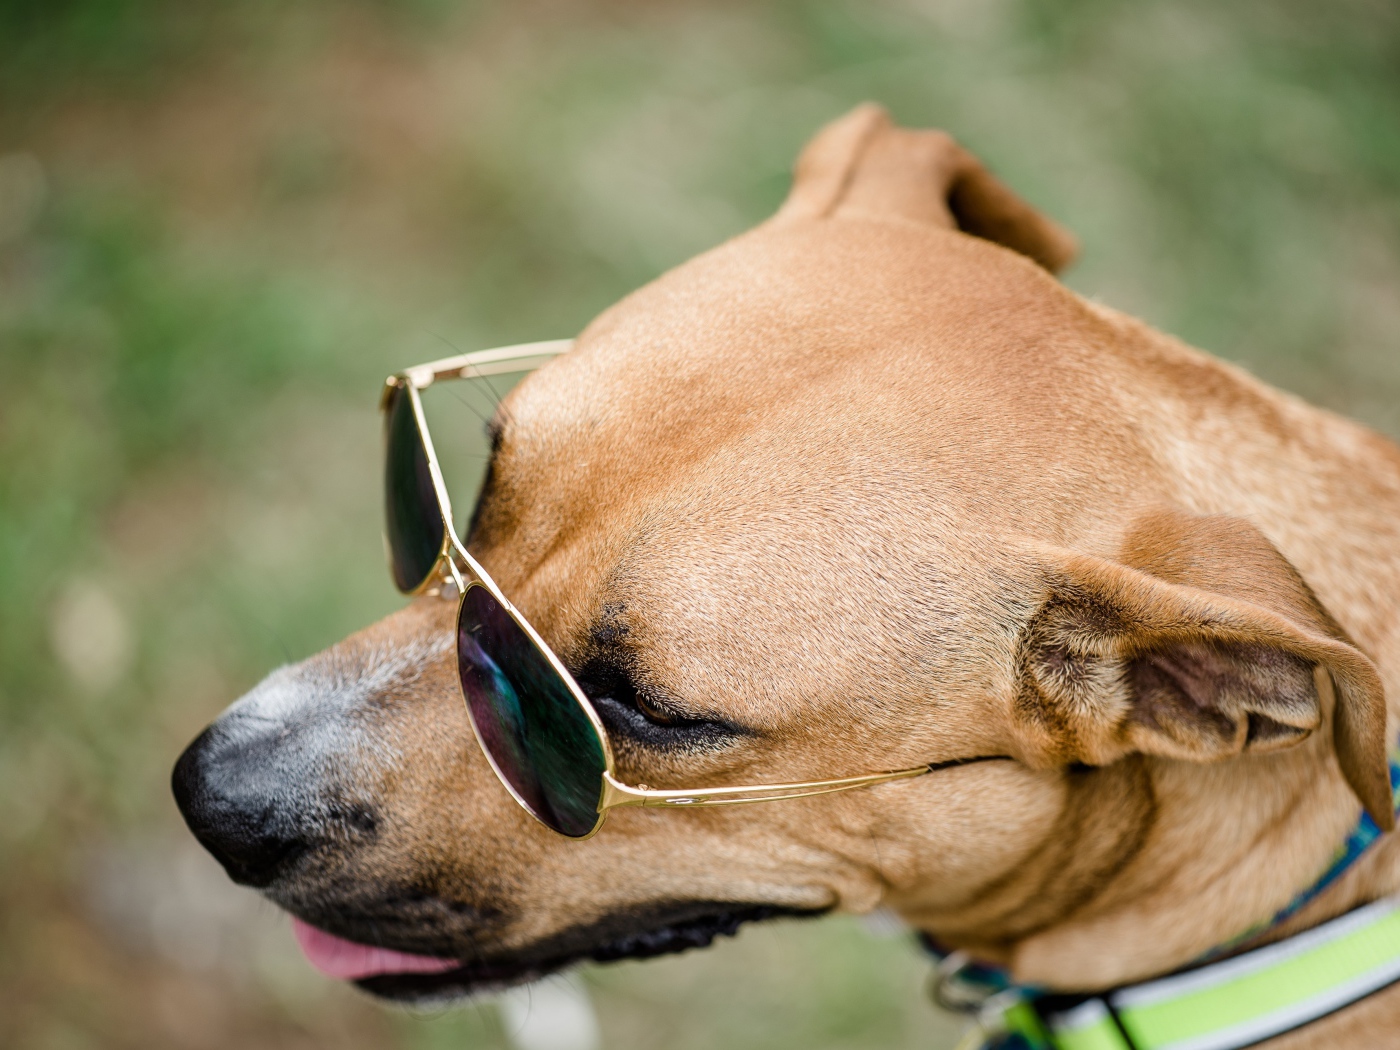 Big Dog With Glasses - Companion Dog , HD Wallpaper & Backgrounds